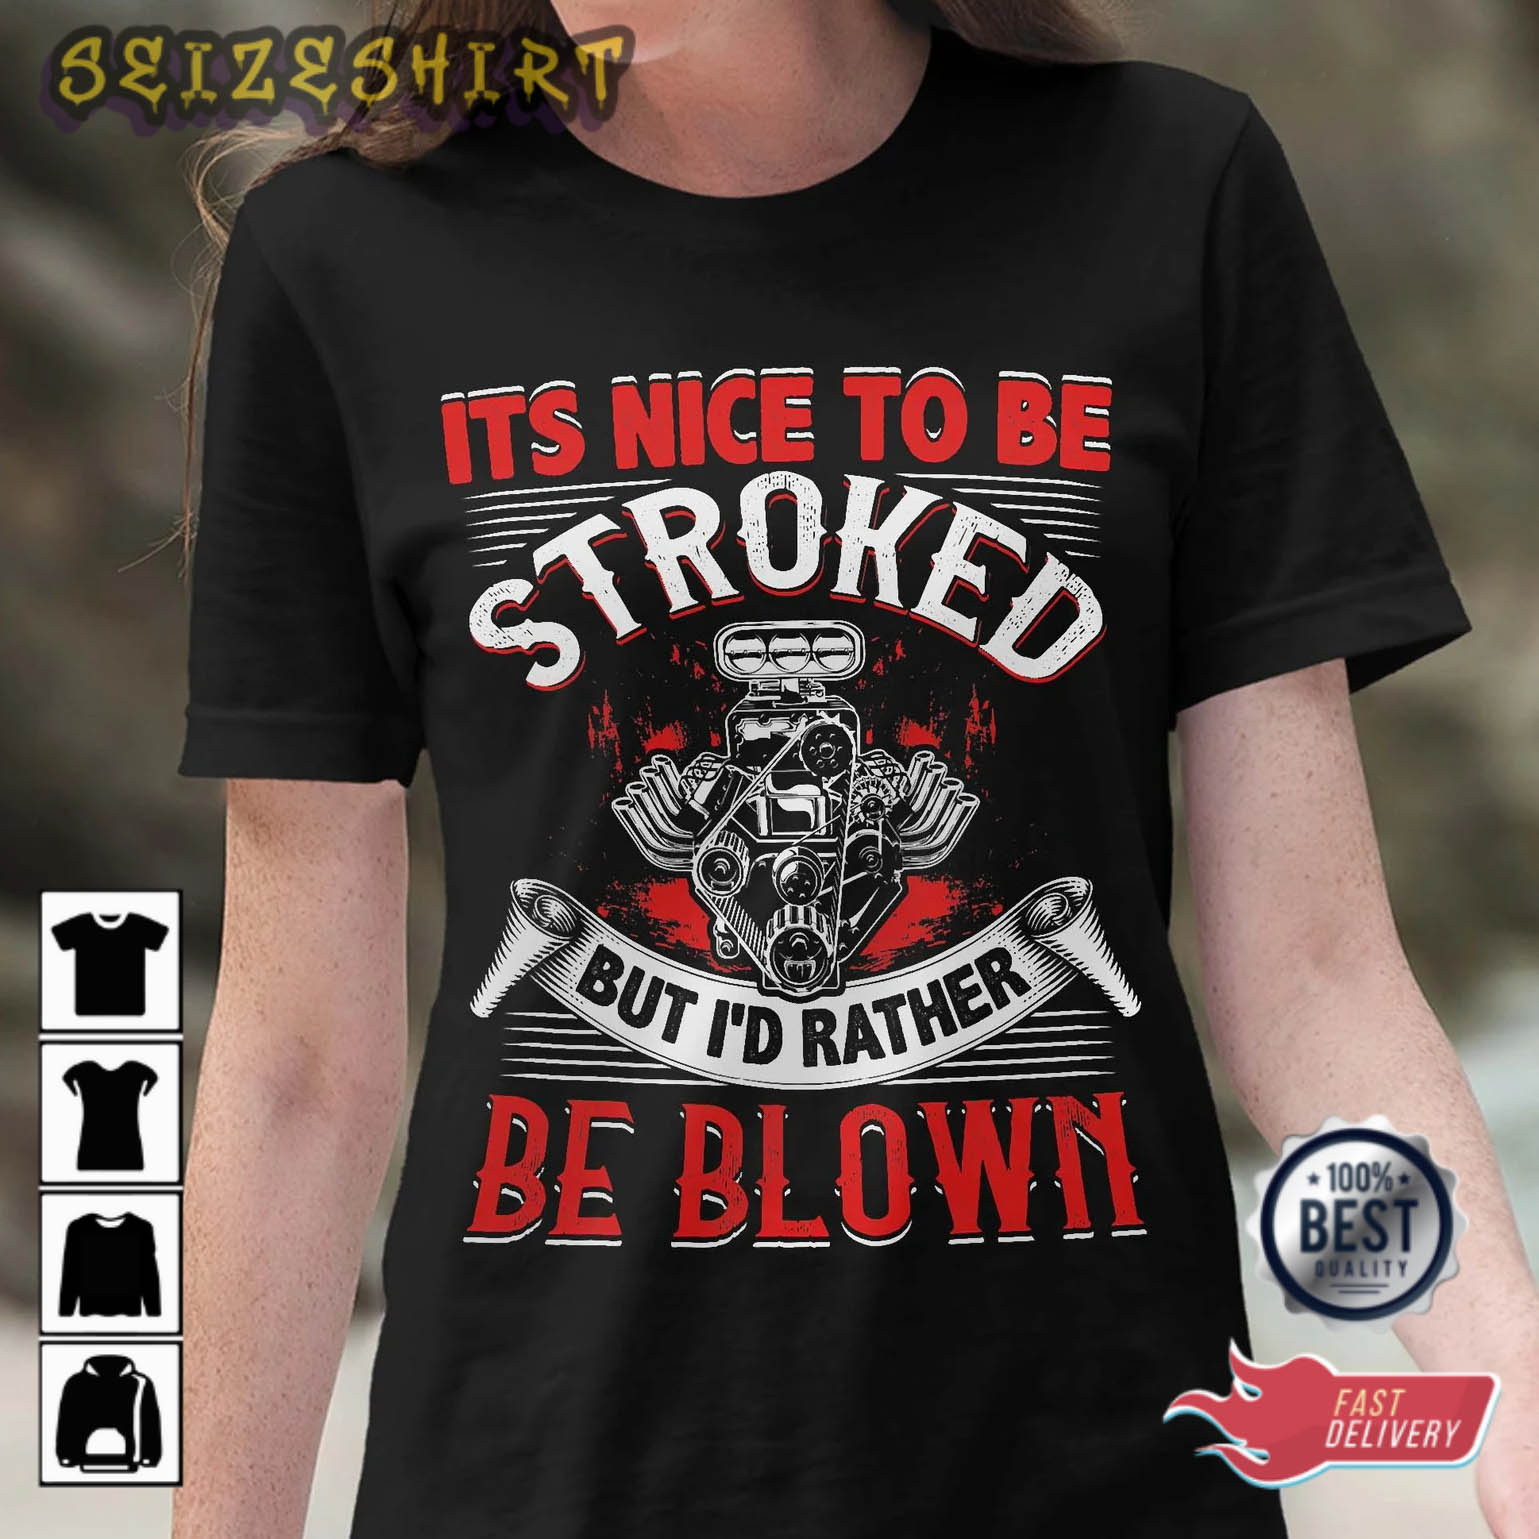 It's Nice To Be Stroked But Id Rather Be Blown T-Shirt